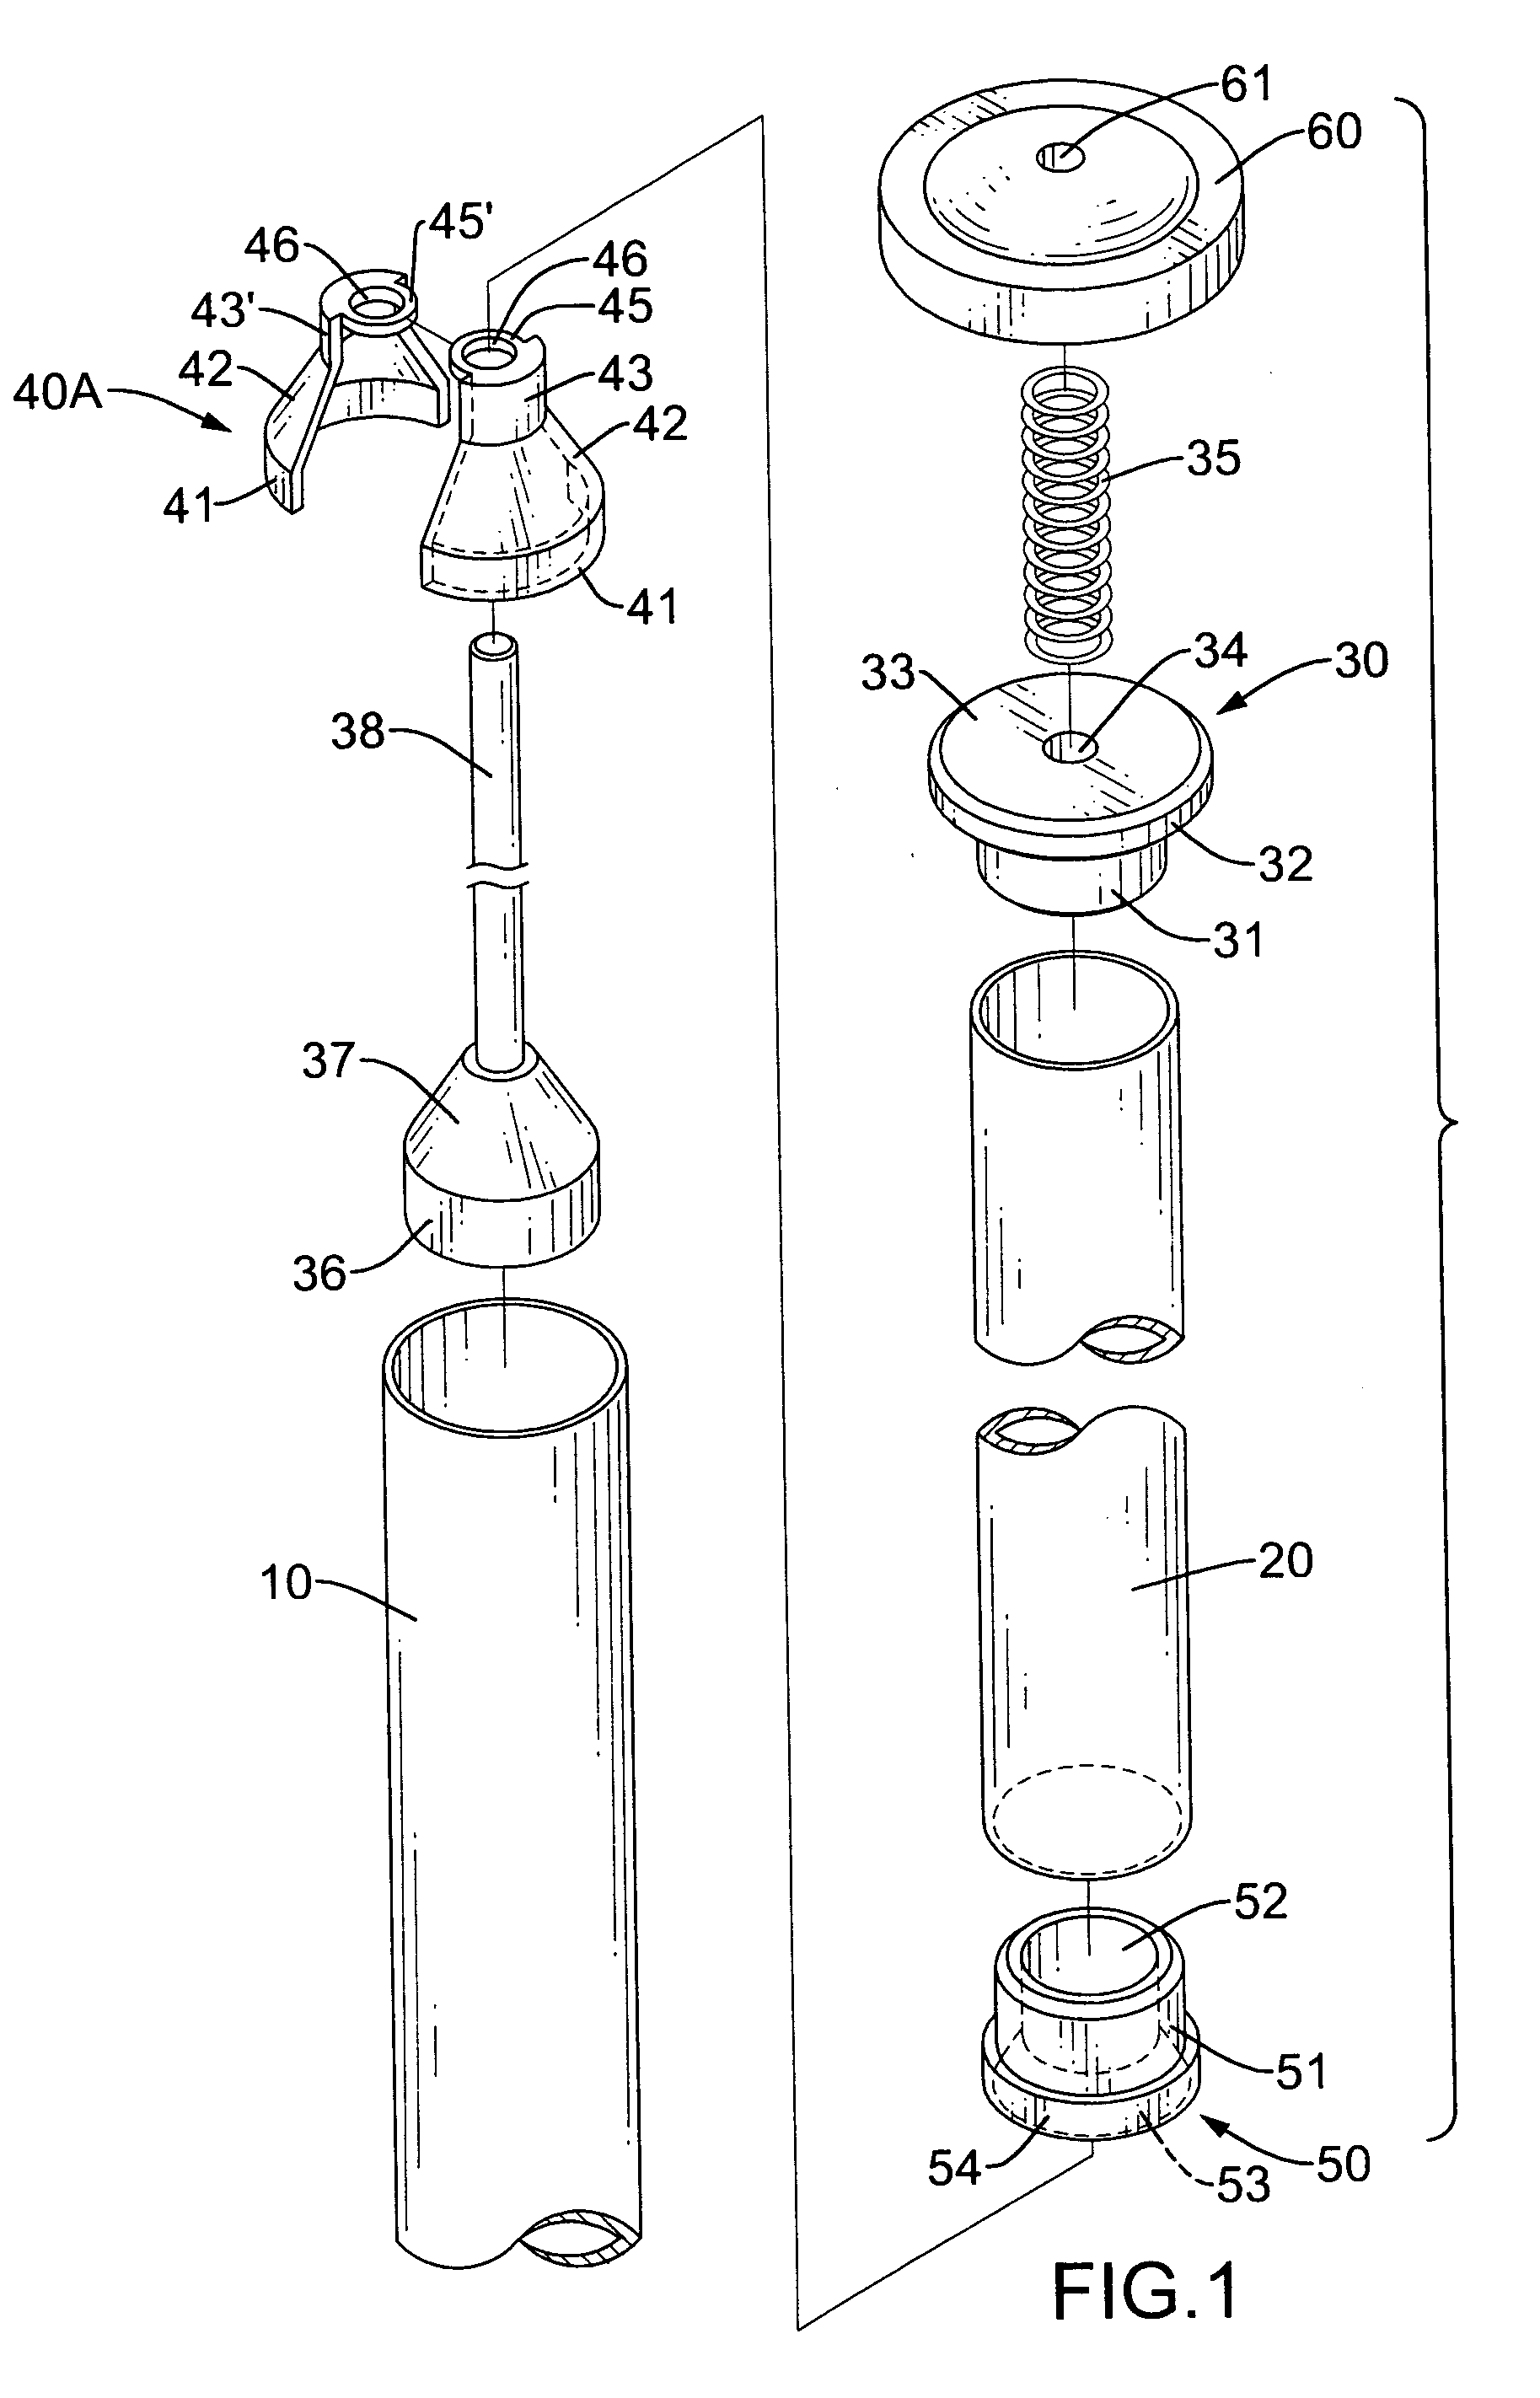 Telescopic tube assembly for a clothes rack